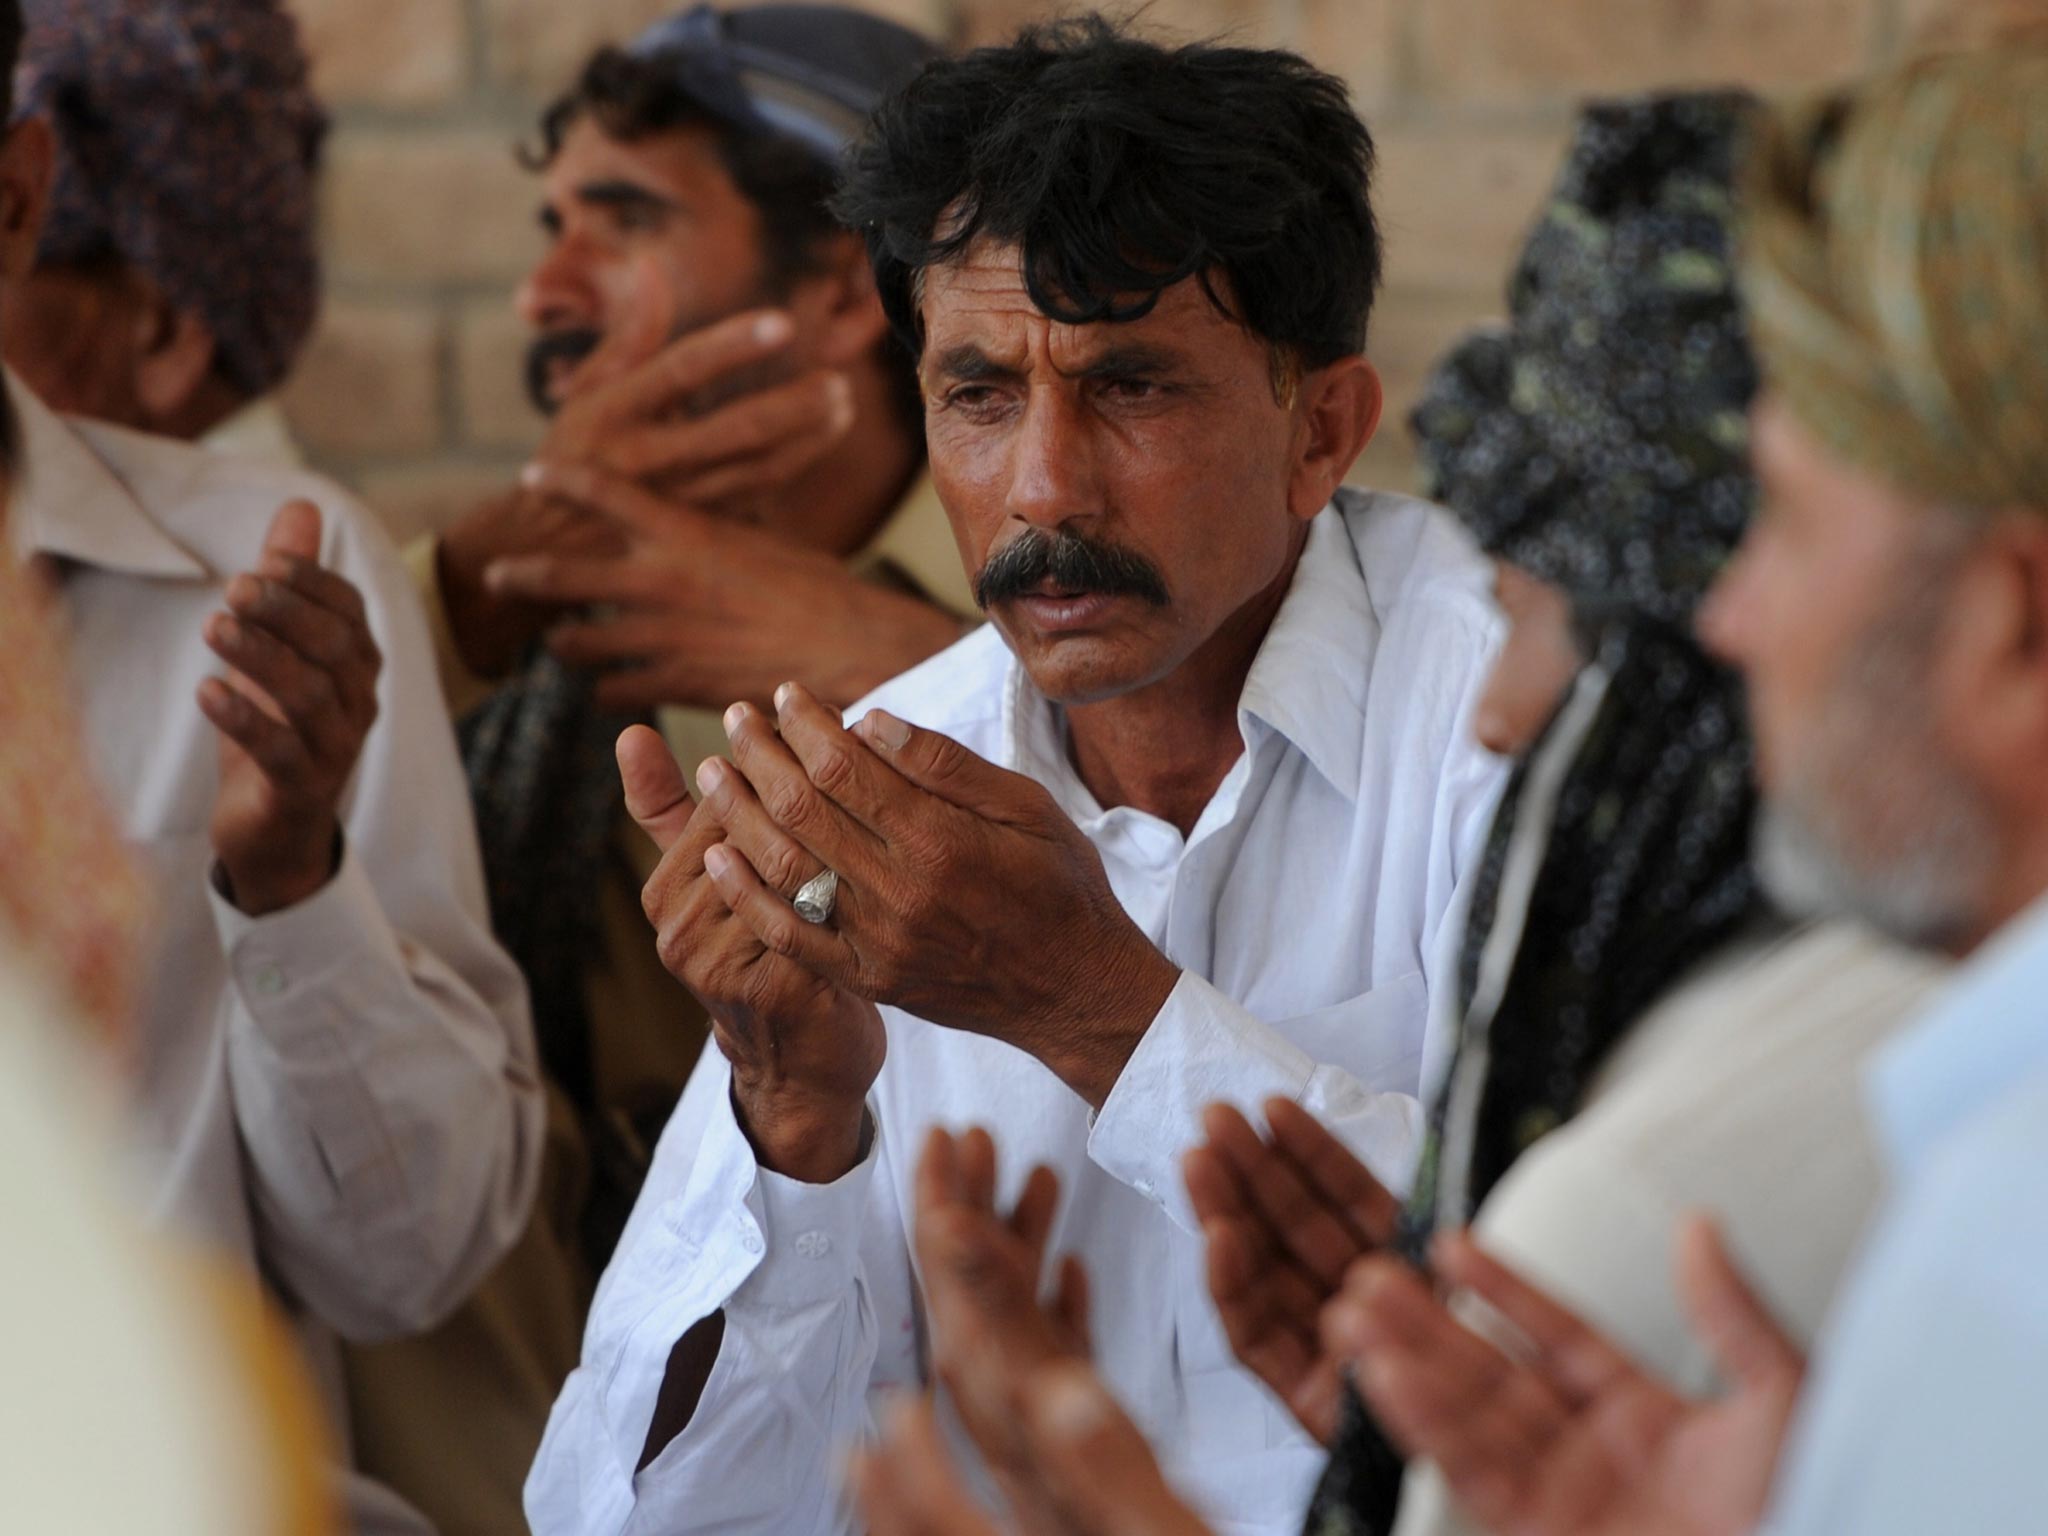 Pakistani resident Mohammad Iqbal (C) prays alongside relatives for his wife Farzana Parveen, who was beaten to death with bricks by her father and other family members